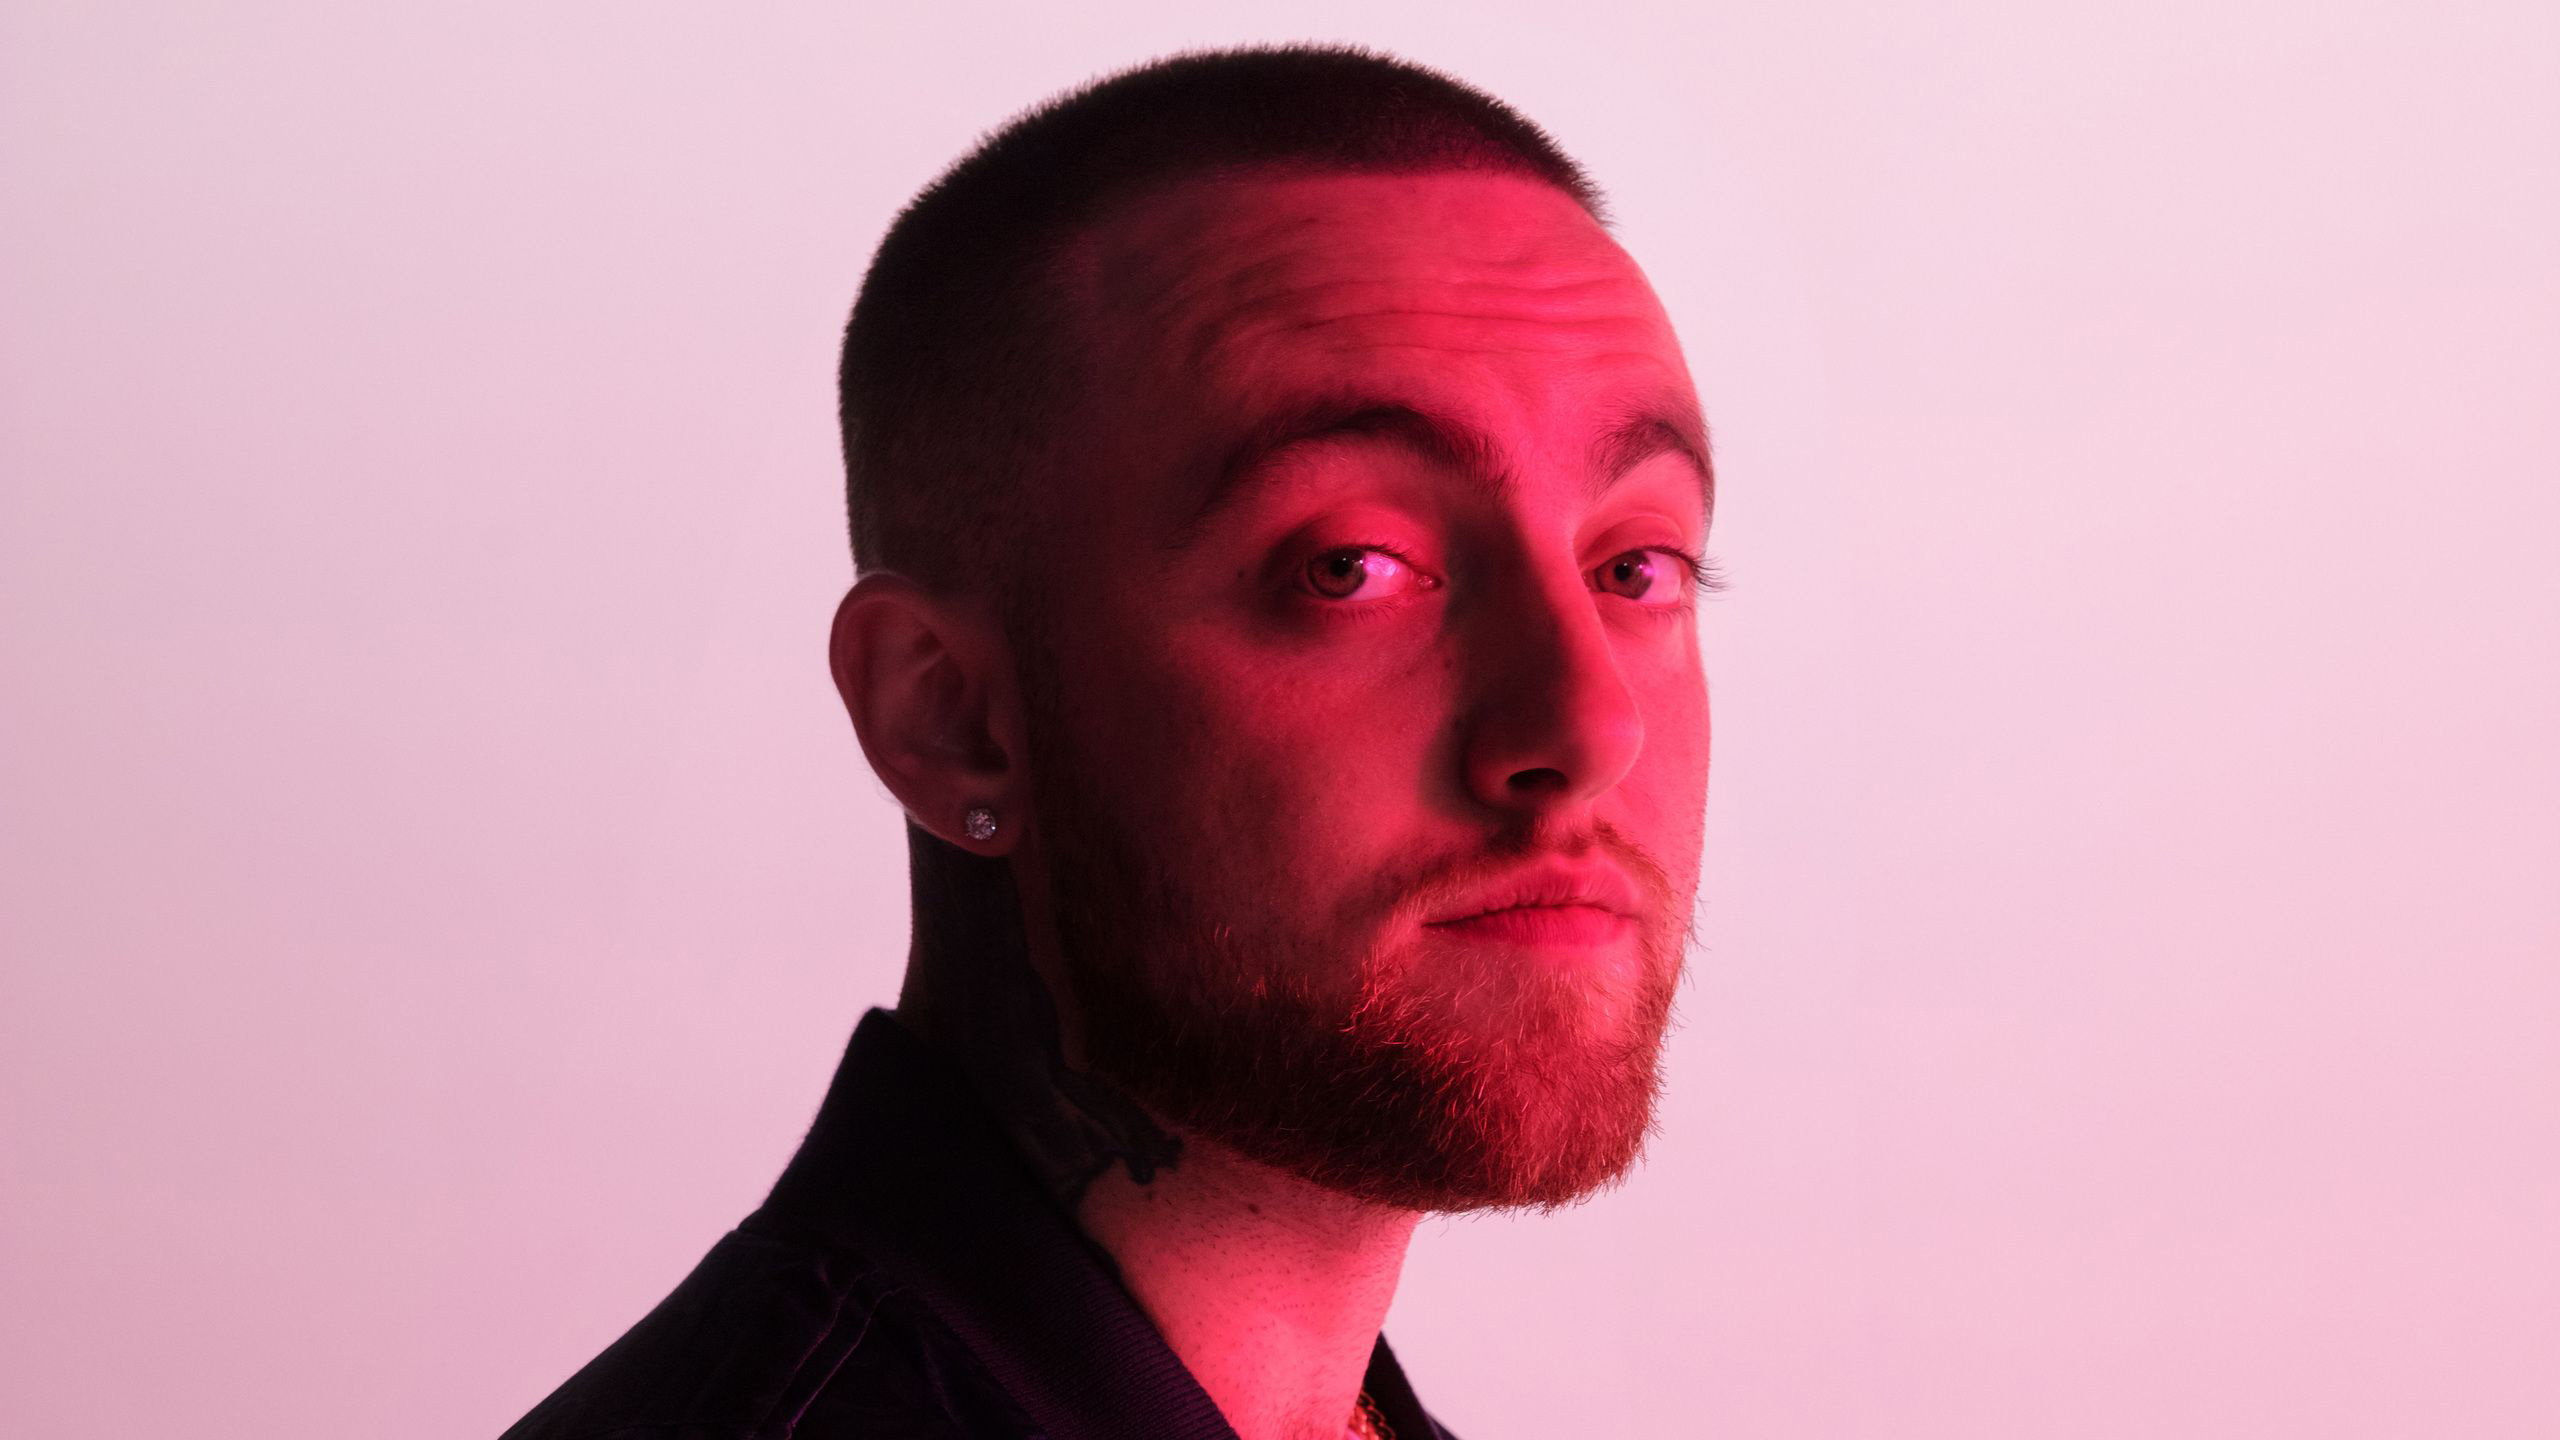 Mac Miller Is Facing One Side For A Photo In A Pinkish Wallpaper 2K Celebrities